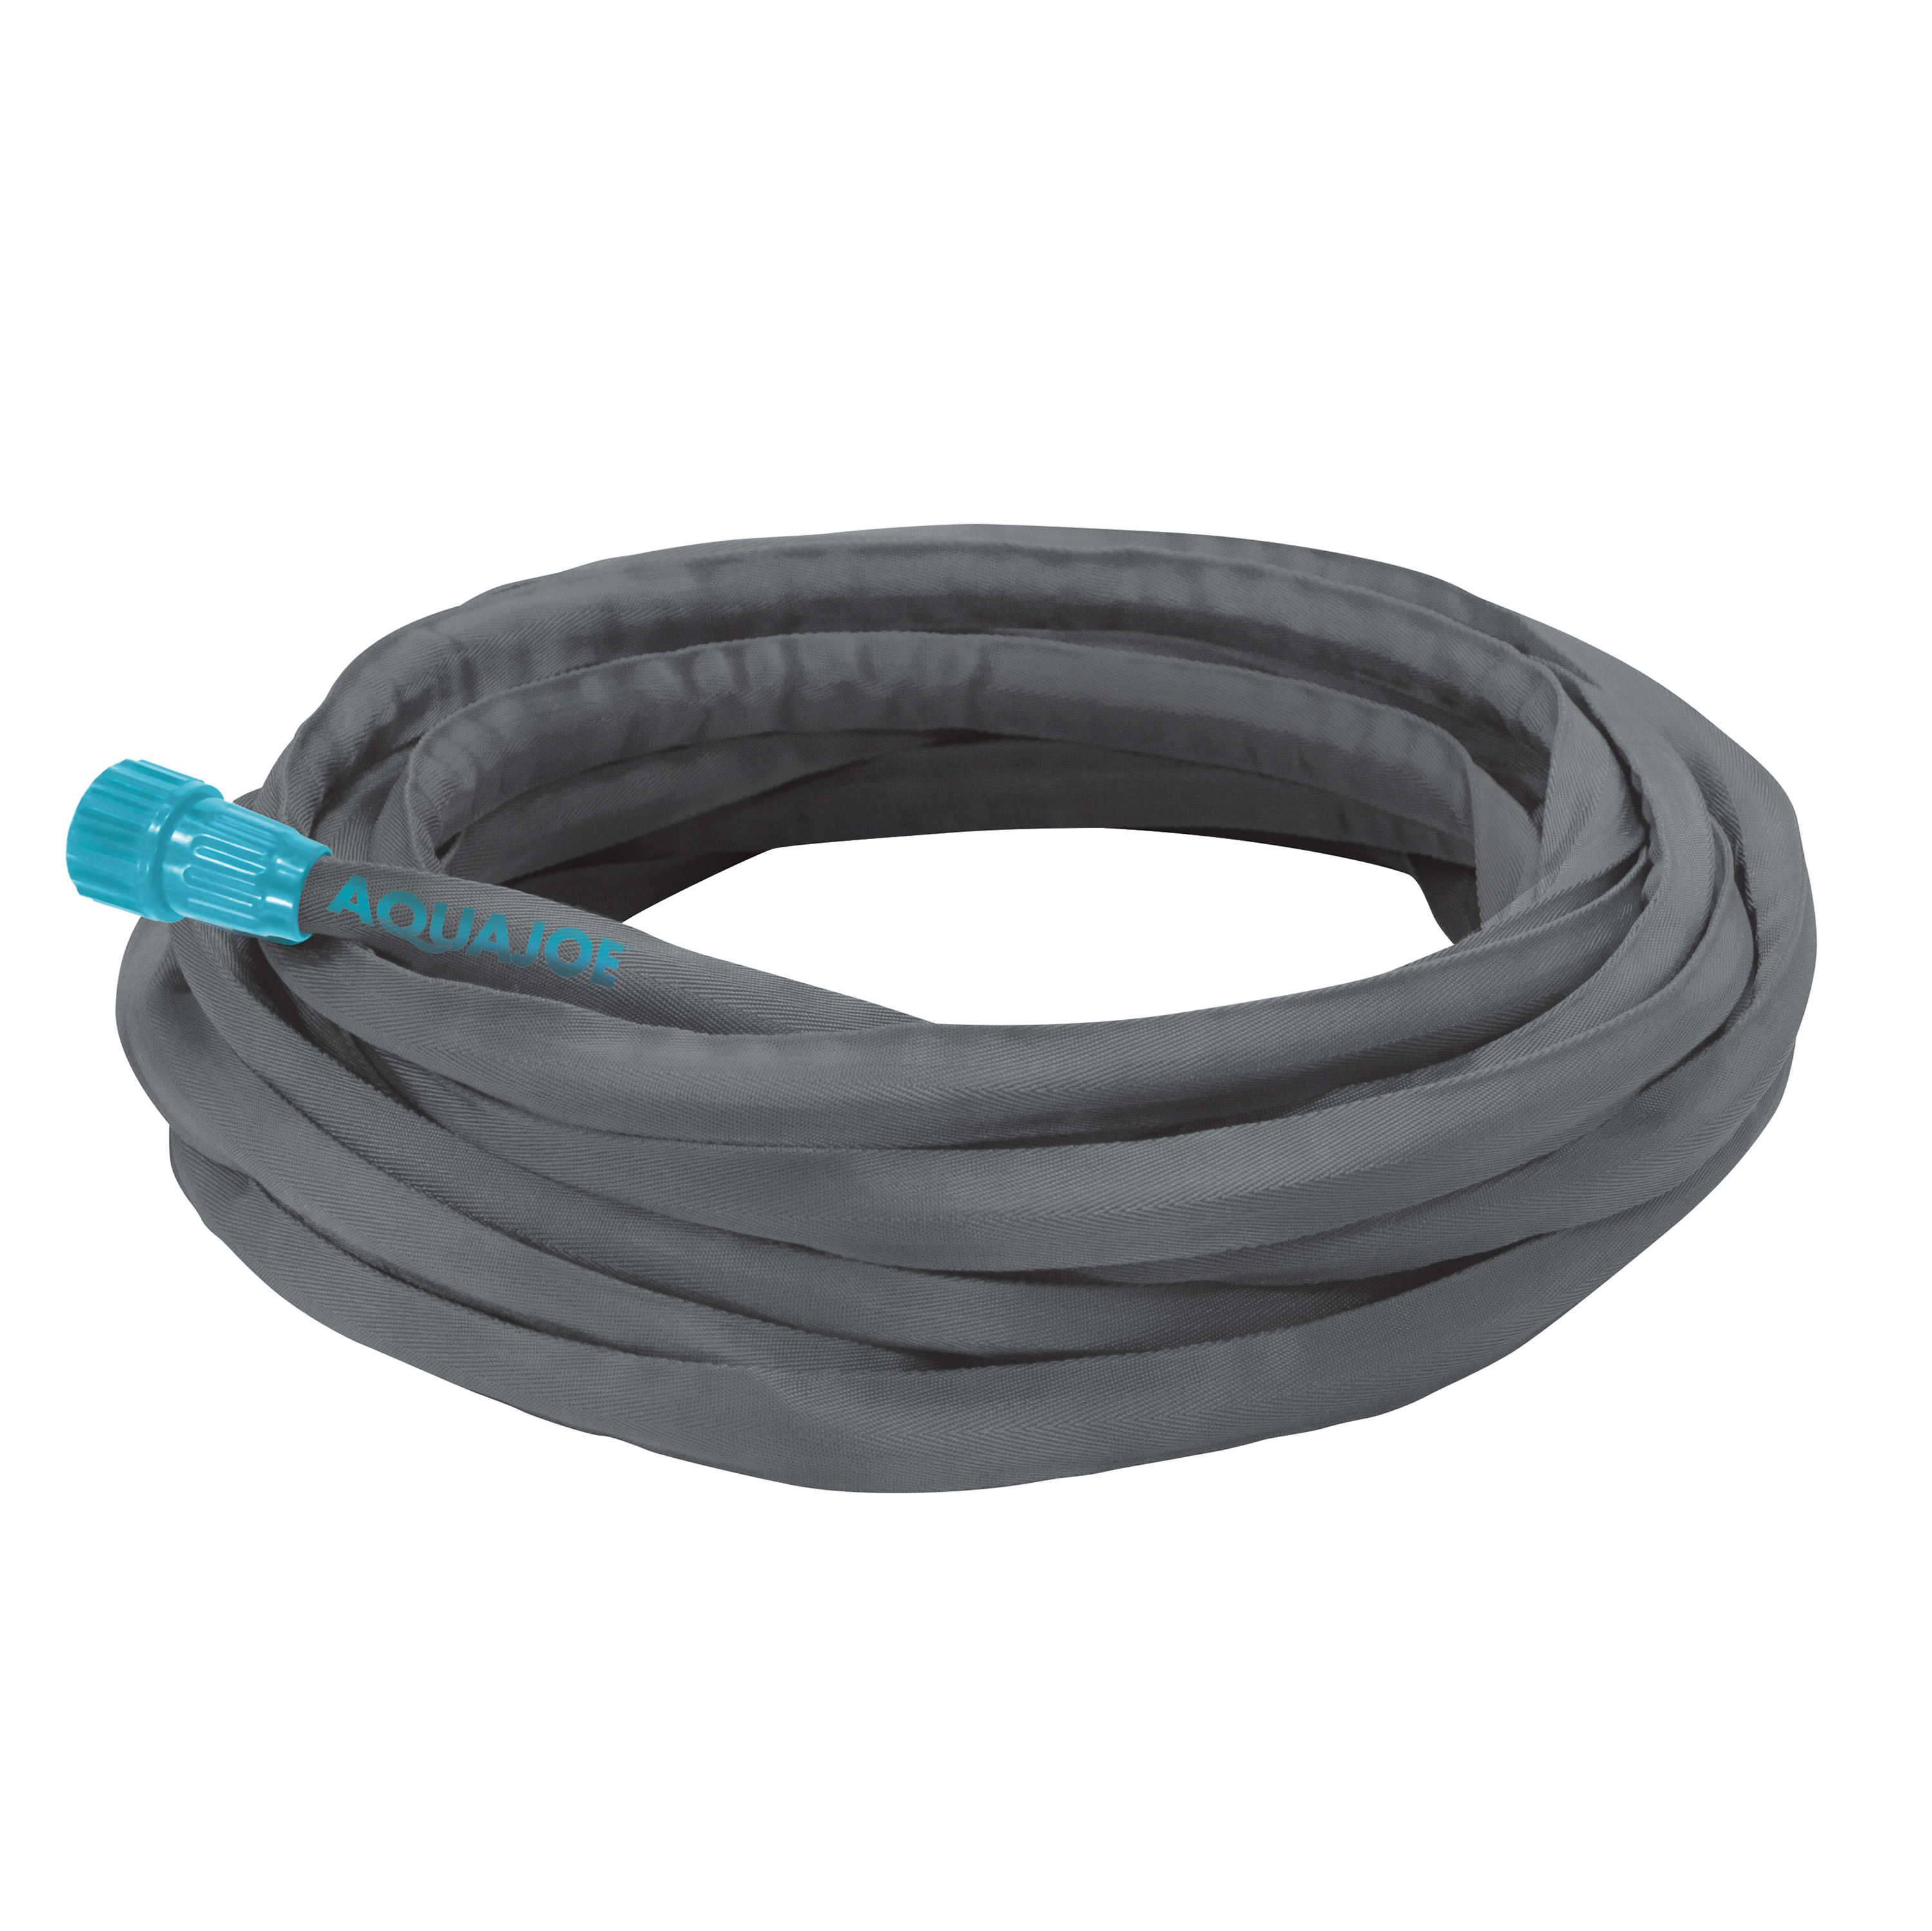 1 Rubber Garden Hose Gasket Ship From U S New No More Water Leaks Free